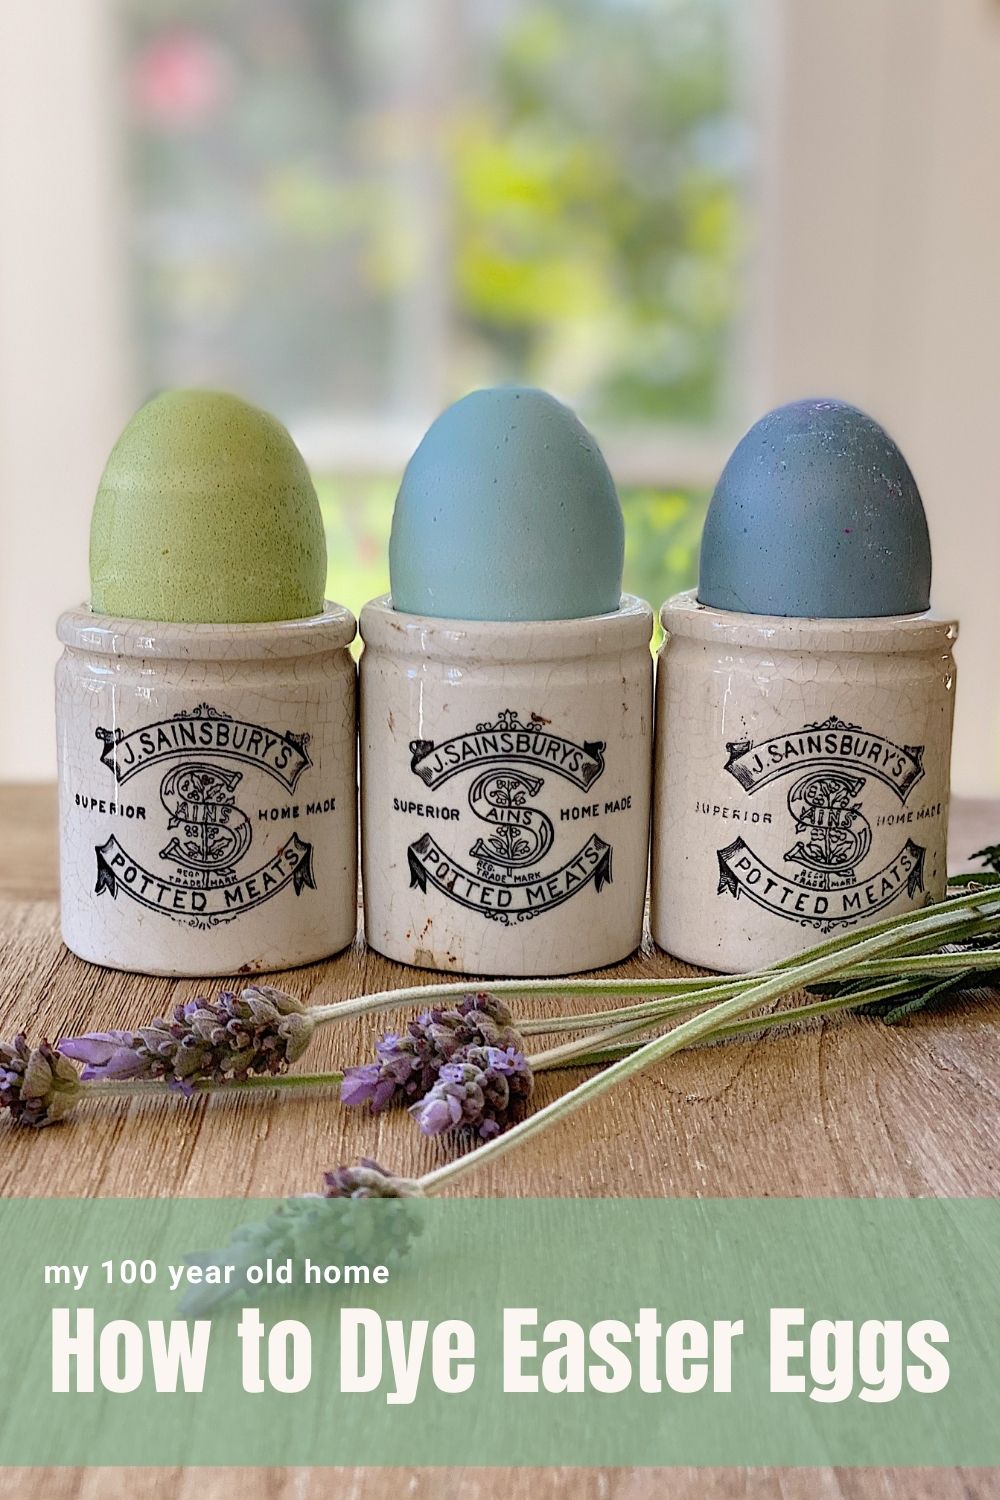 I have always loved Araucana chicken eggs ever since Martha Stewart shared them in her magazine. Today I shared how to dye Easter eggs in the same beautiful chicken egg colors.